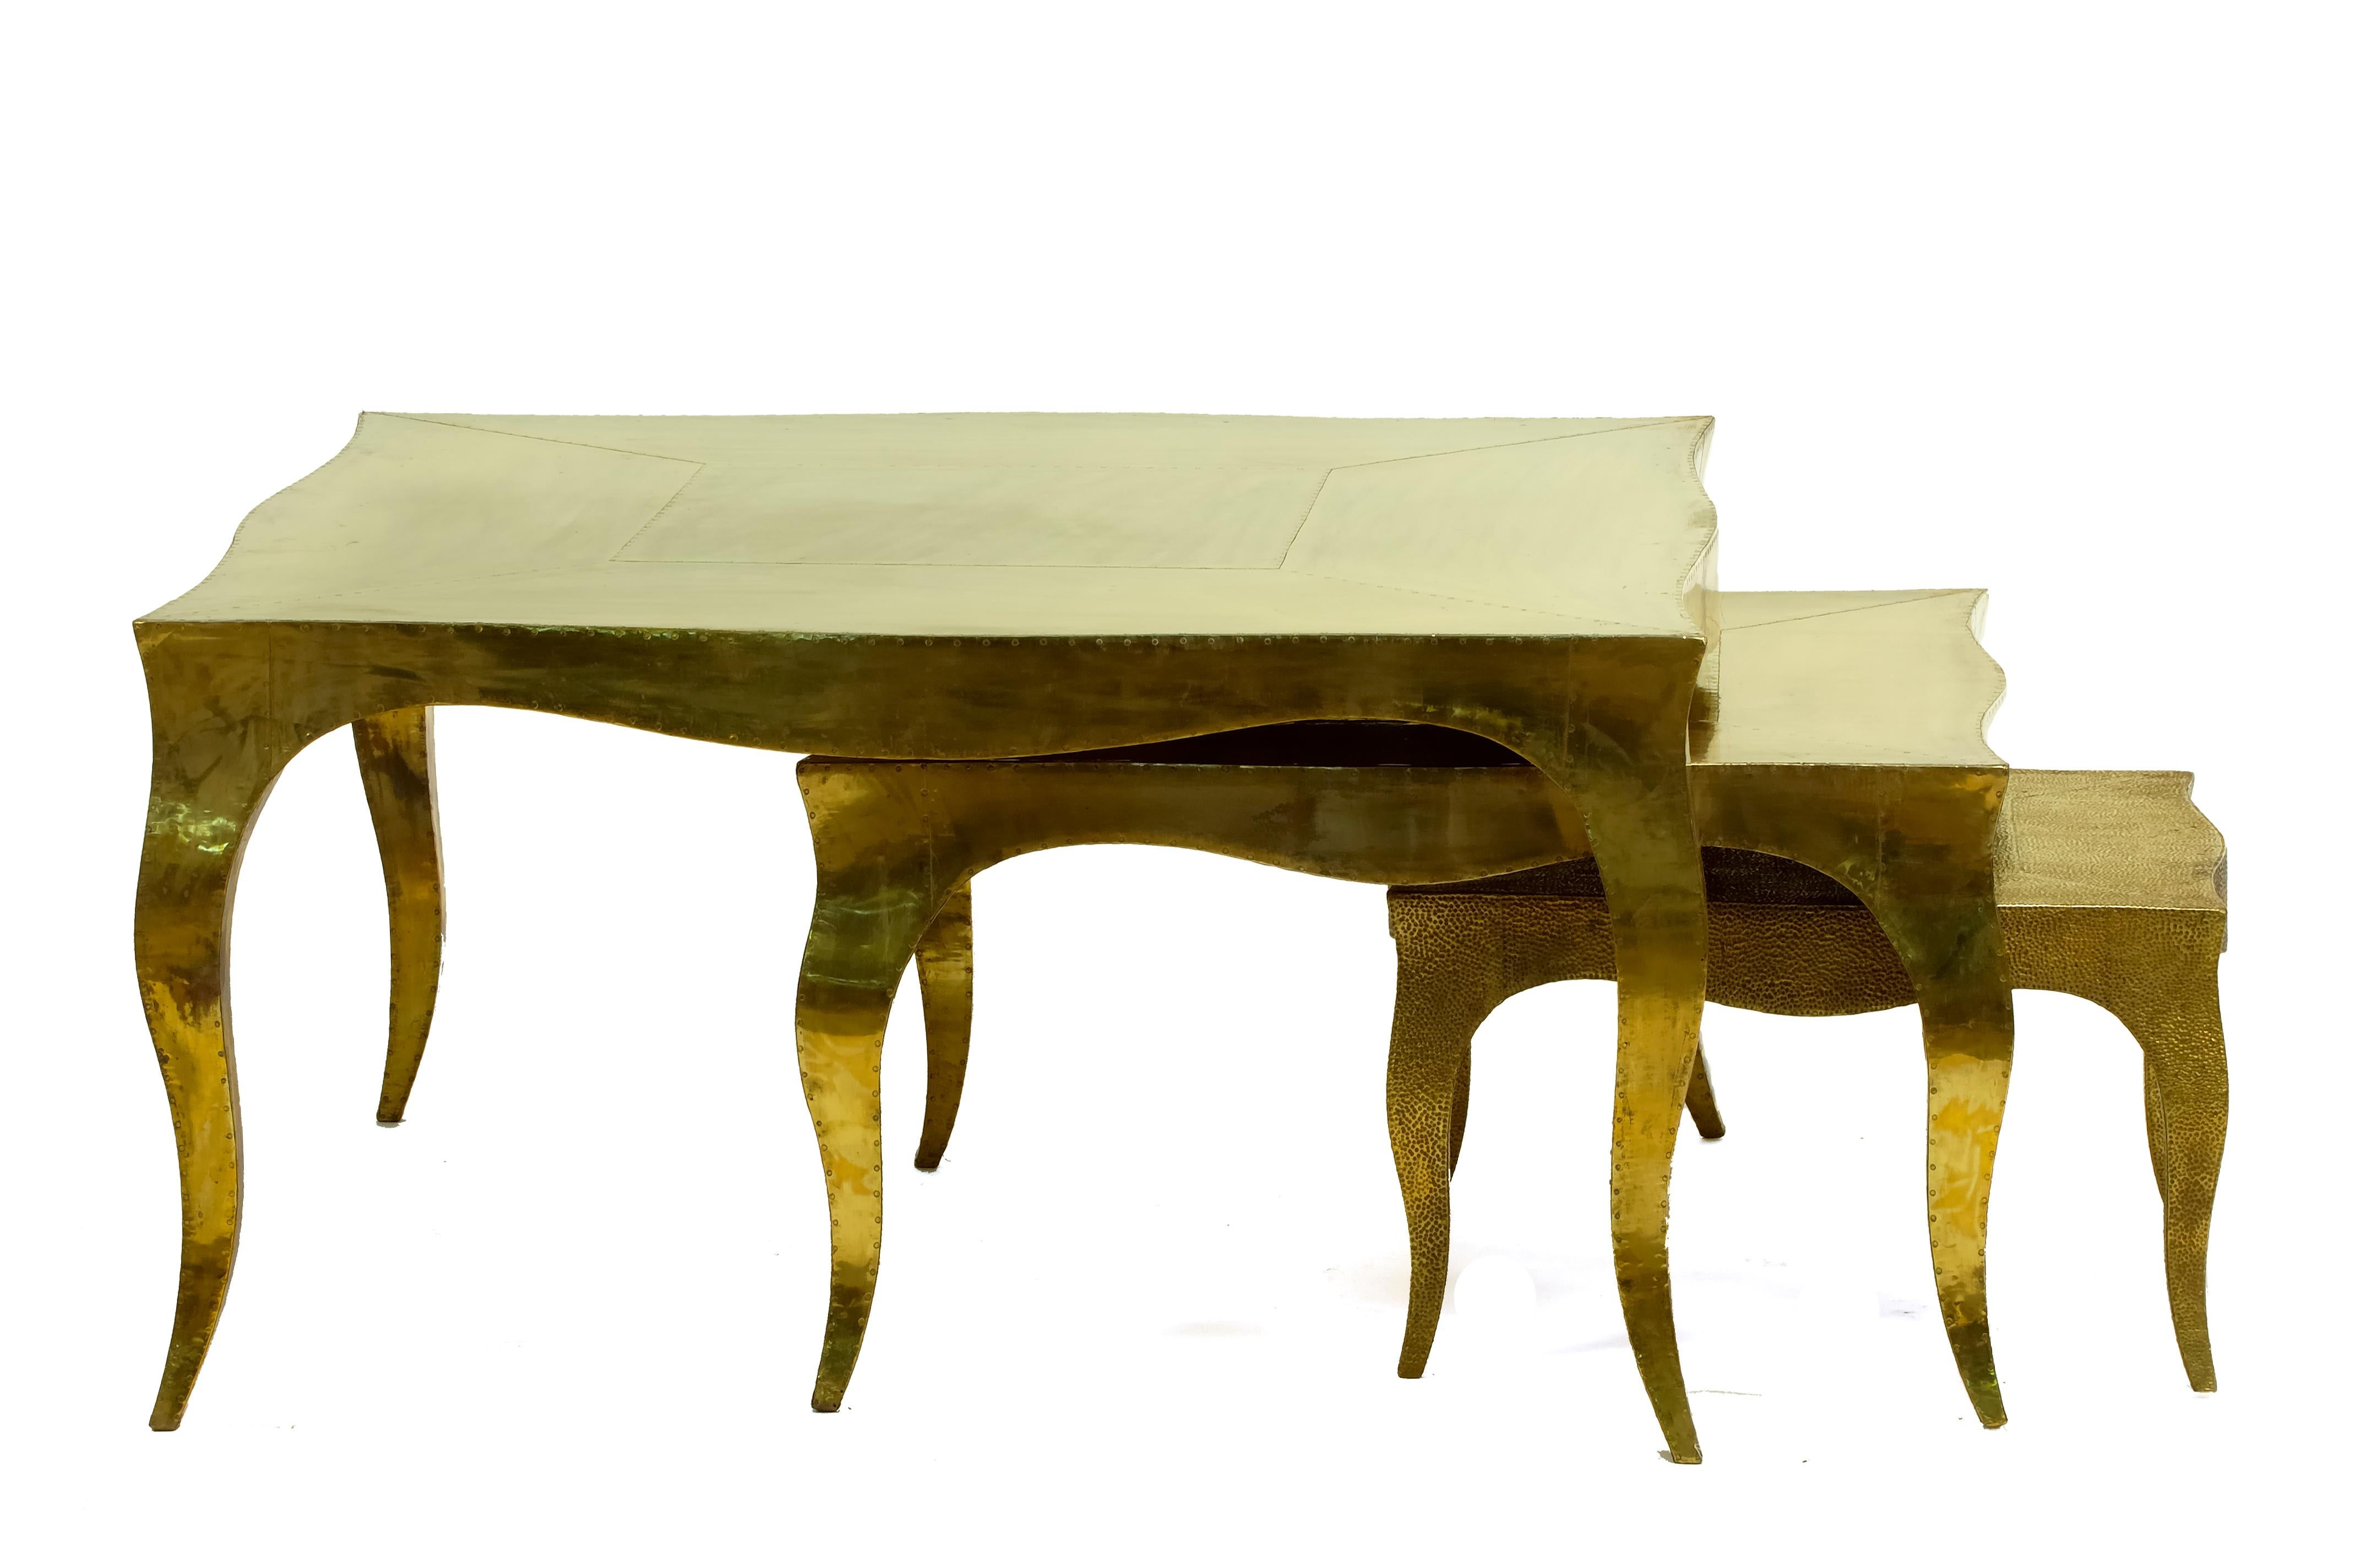 Louise Art Deco Industrial and Work Tables Mid. Hammered Brass by Paul Mathieu For Sale 8